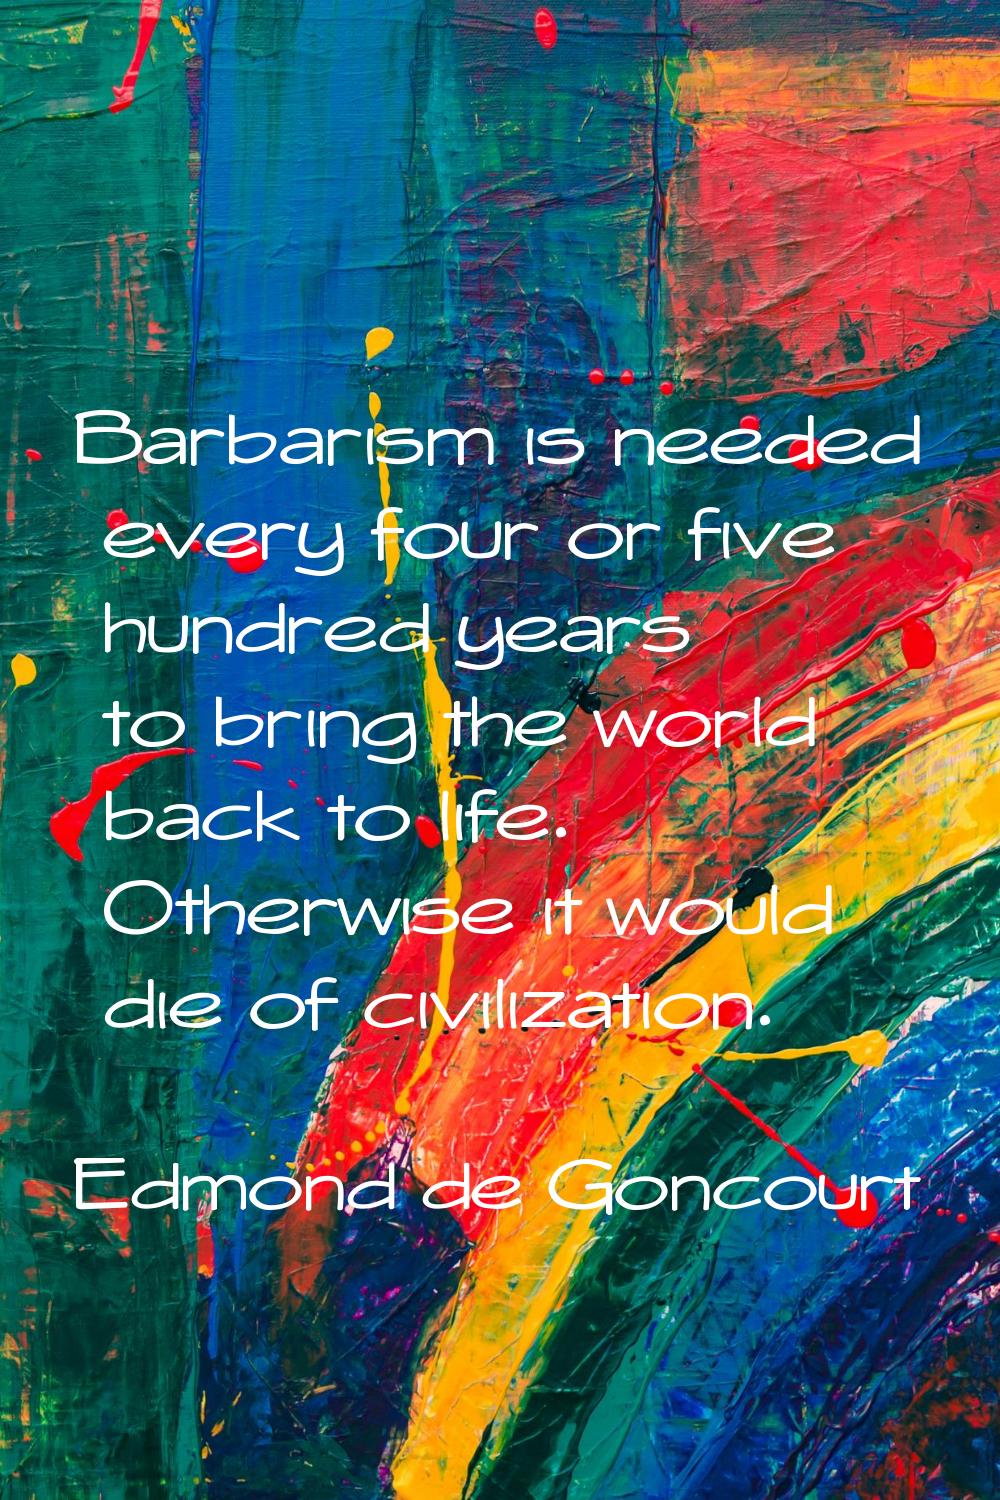 Barbarism is needed every four or five hundred years to bring the world back to life. Otherwise it 